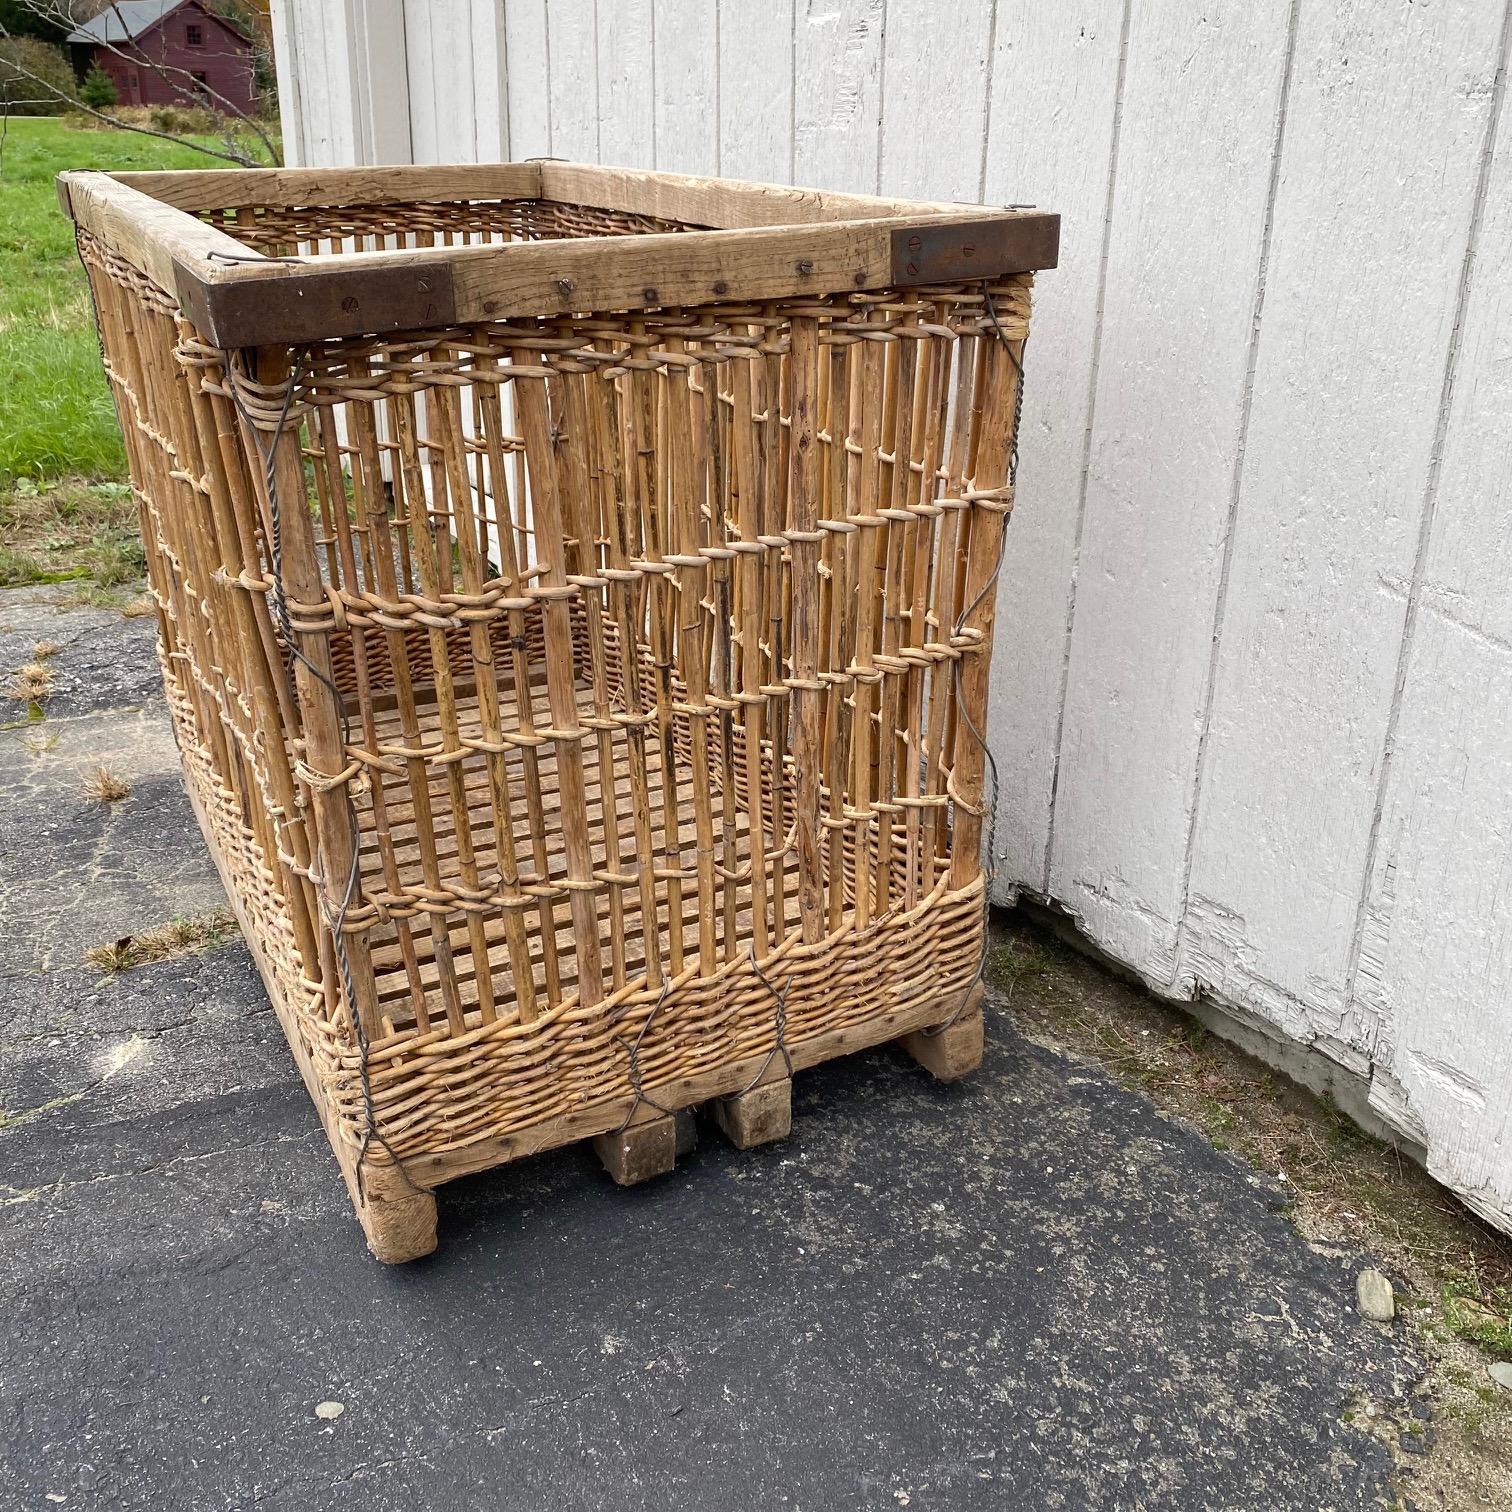  French Very Large Boulangerie or Bakery Industrial Woven Cart Basket on Wheels 2